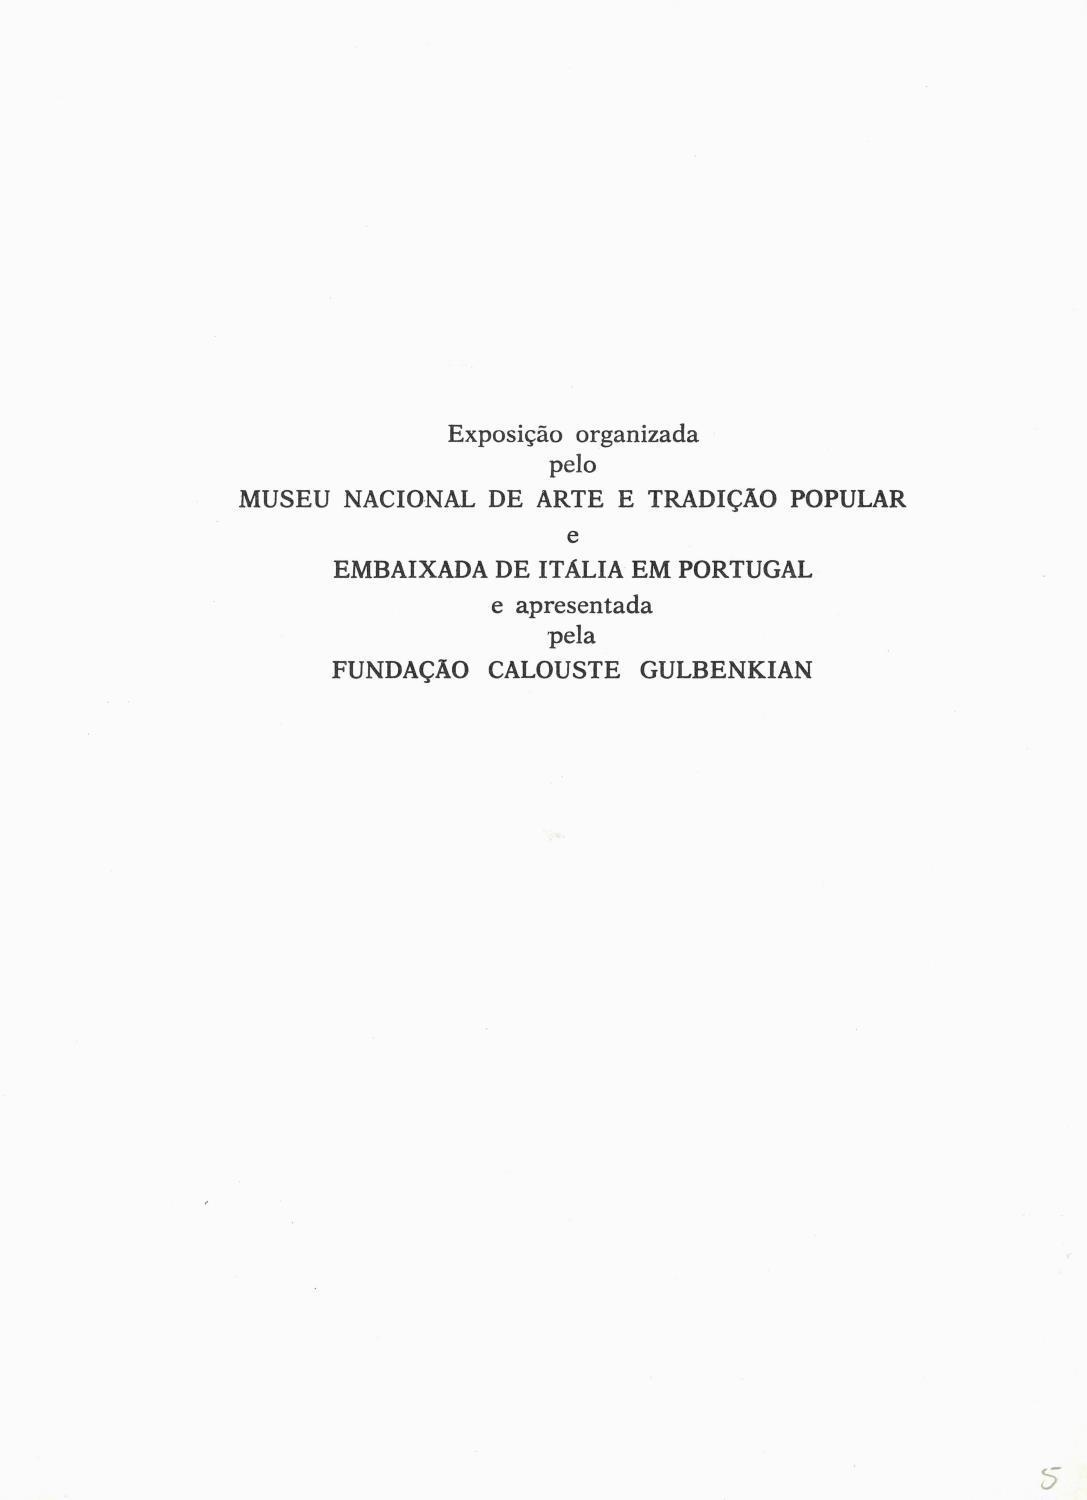 OR323_1.2_fichatecnica